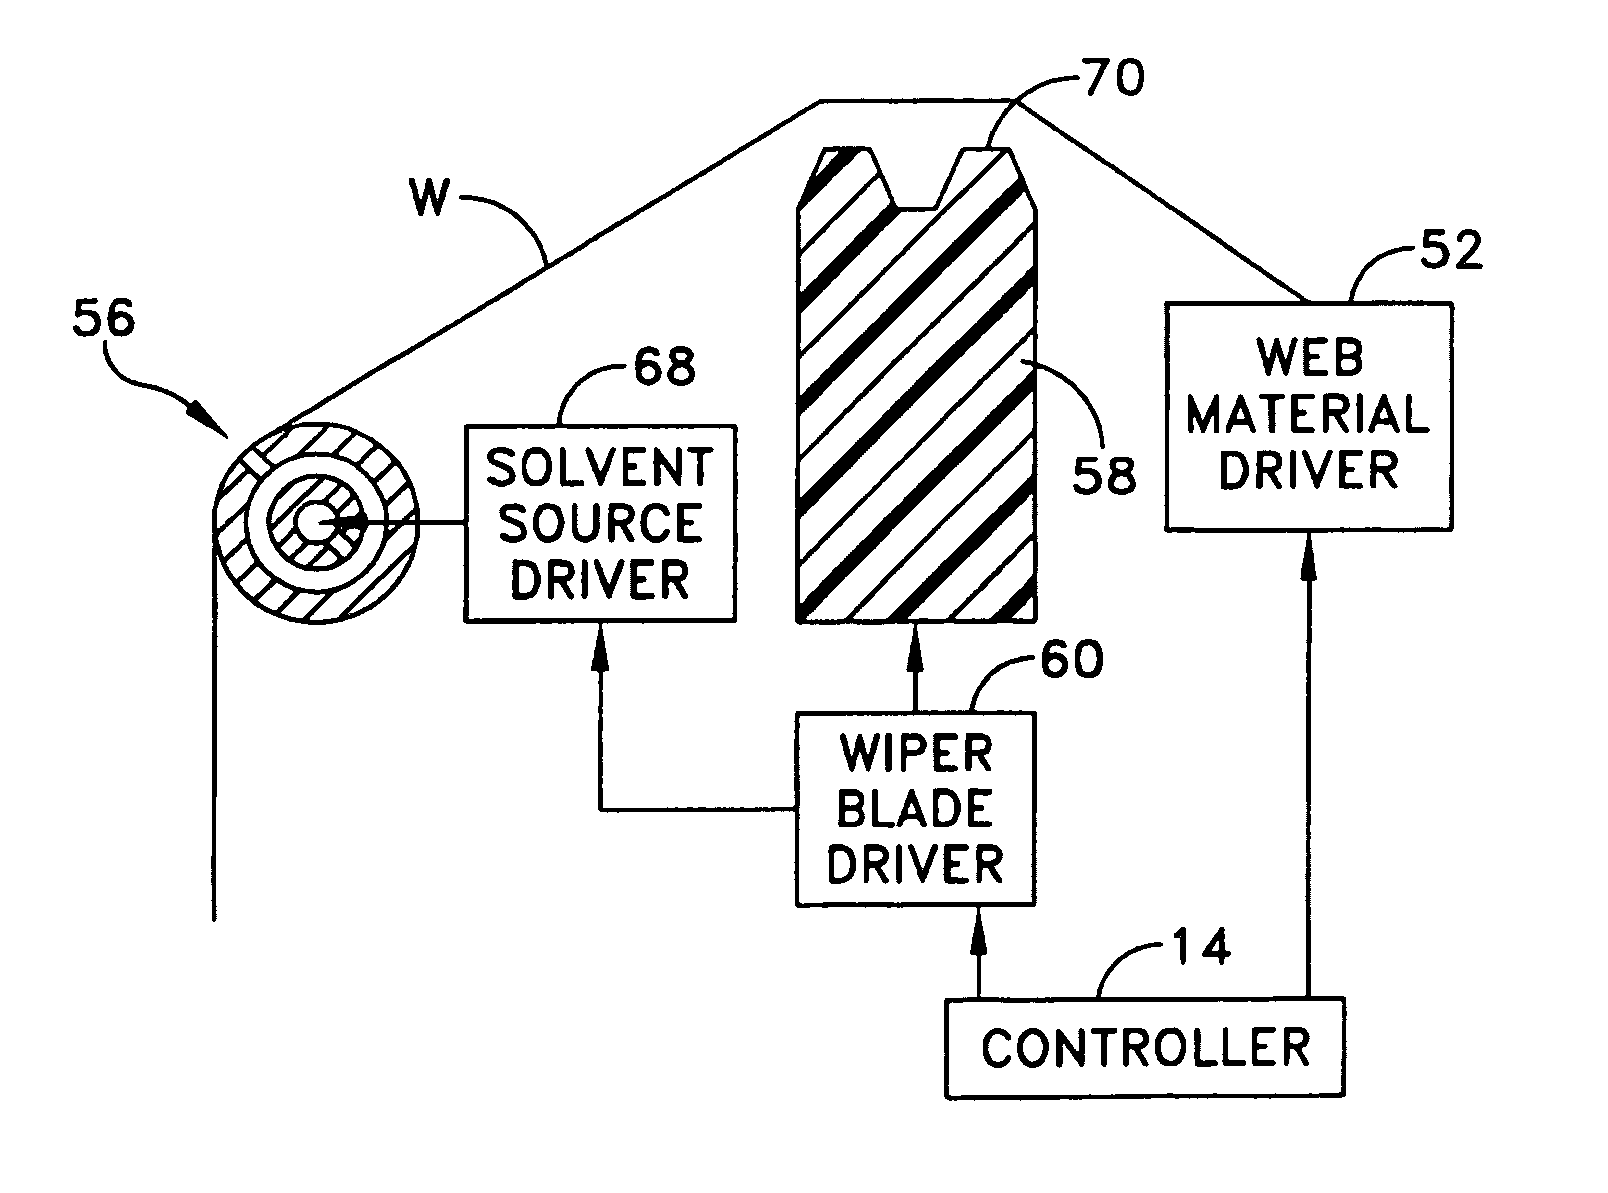 Methods and apparatus for cleaning a stencil